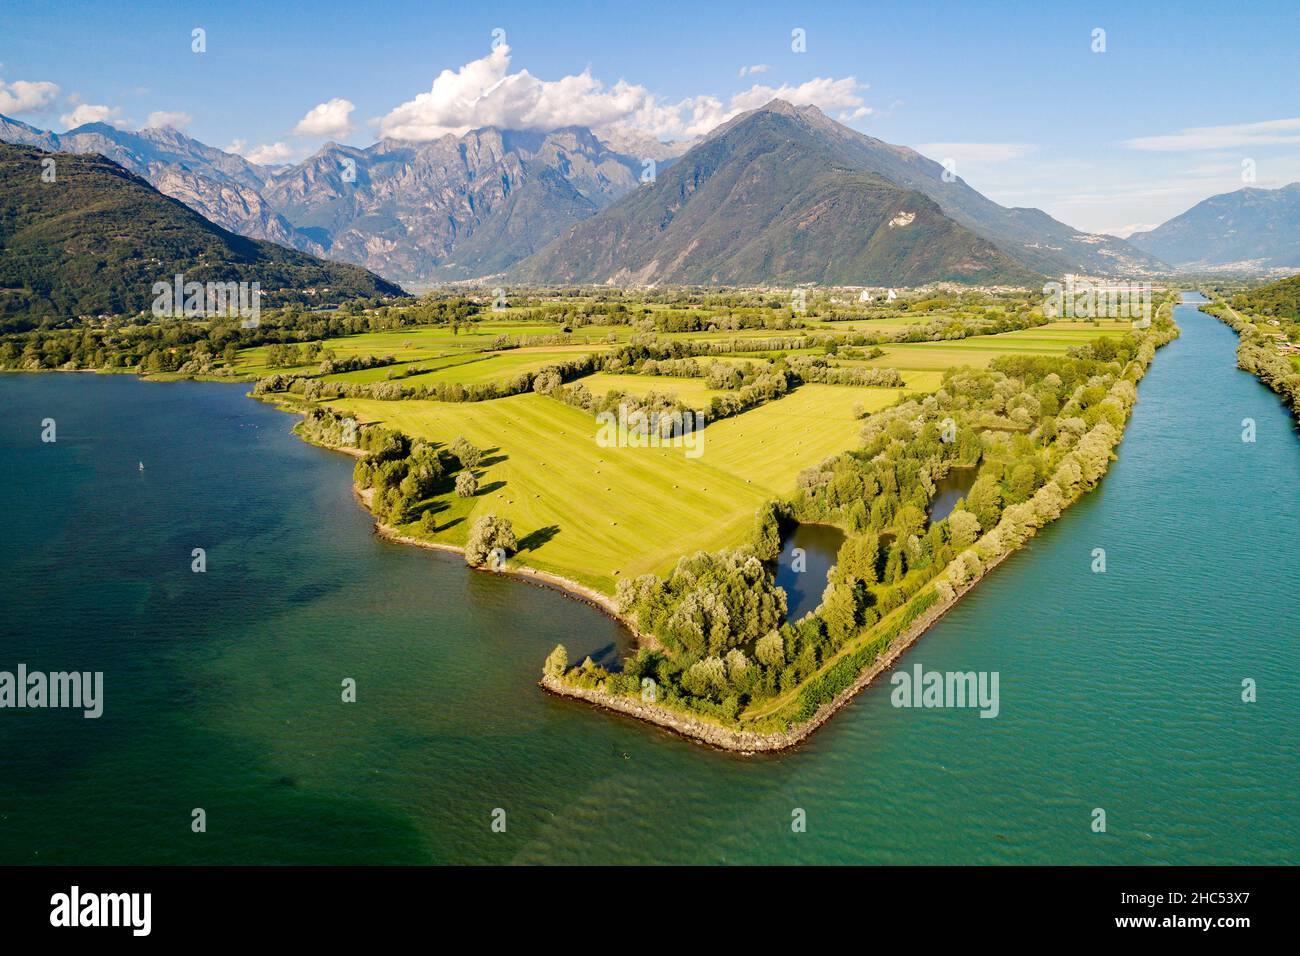 Lake Como (IT), Mouth of the river Adda in the lake, aerial view Stock Photo